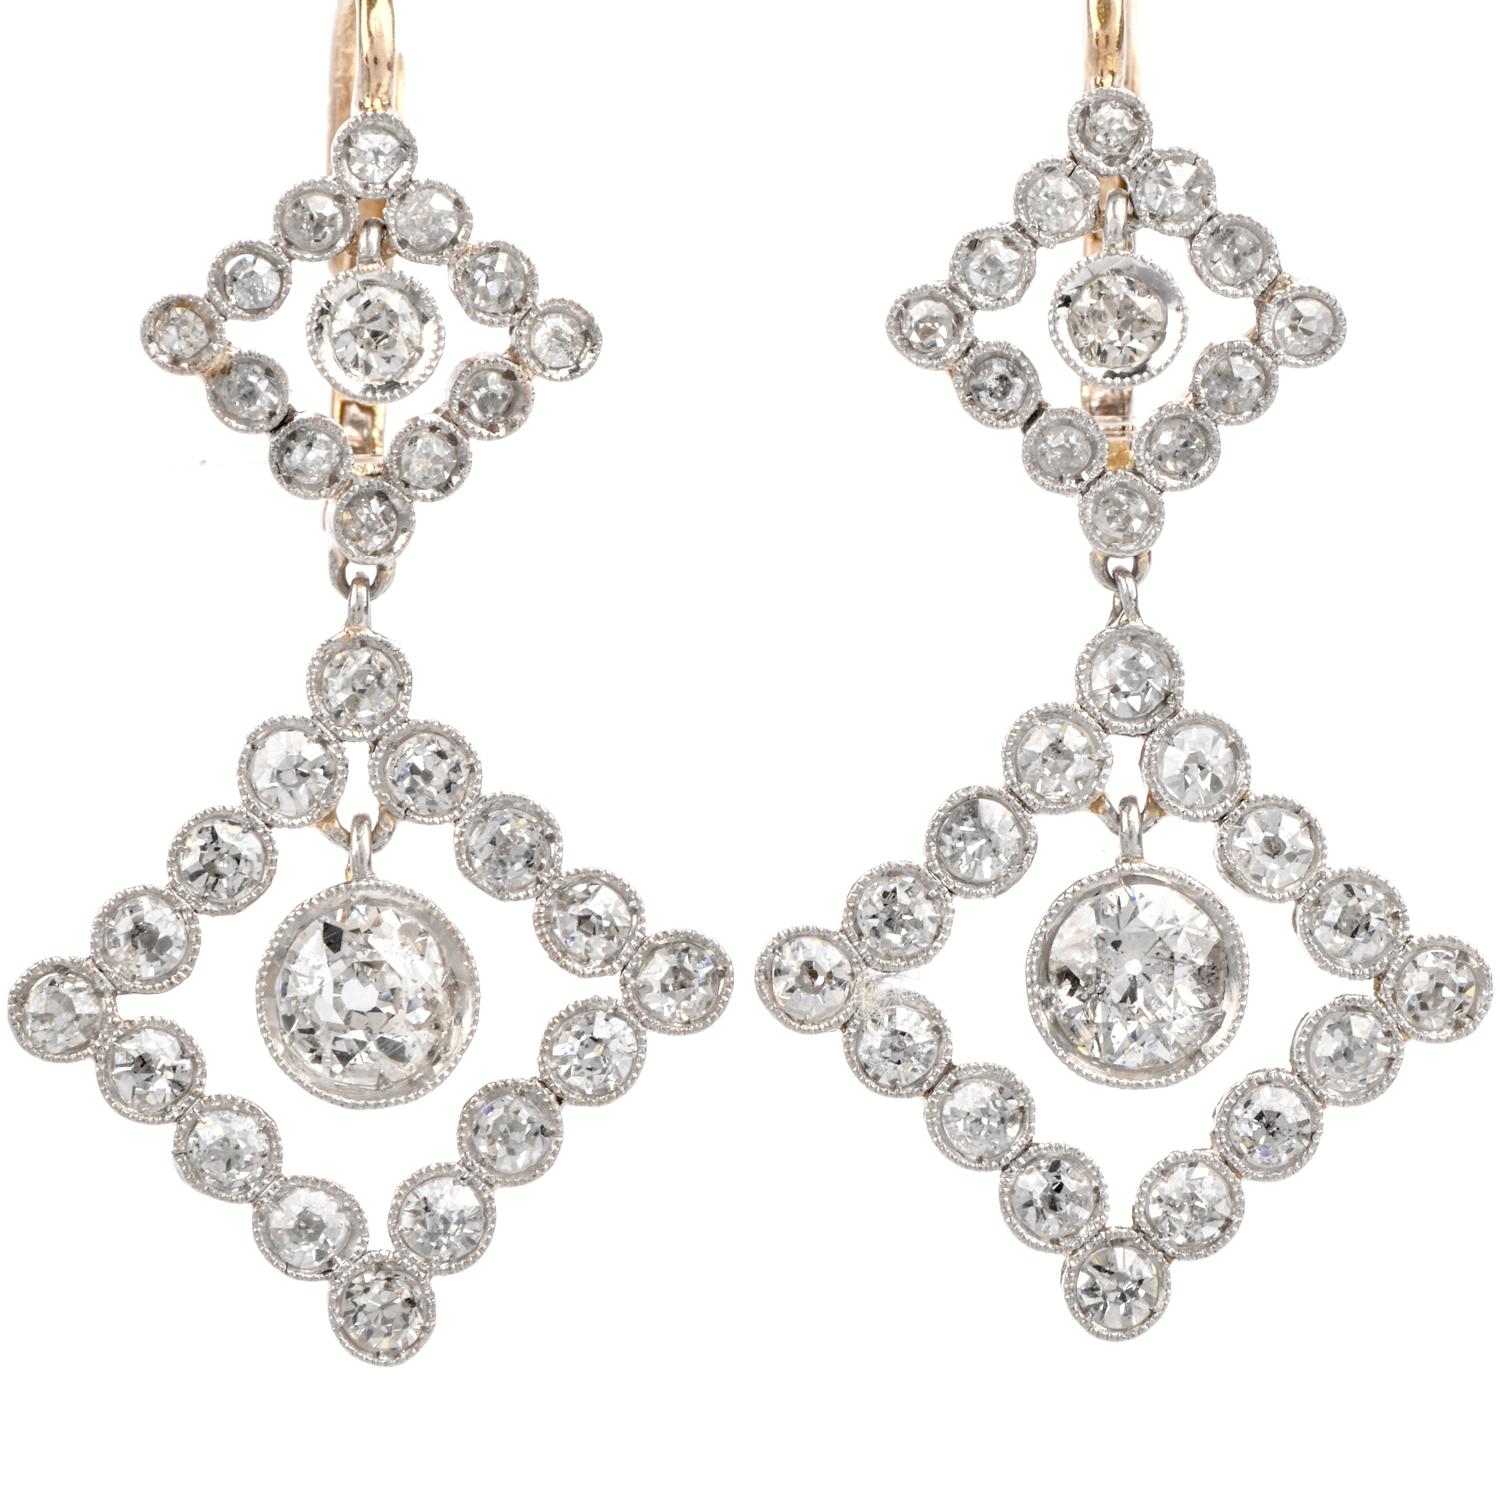 Mix your colors with these extraordinary, sparkling classic vintage Chandelier earrings

Crafted in Platinum and 18K Yellow Gold.

With both the lower diamond shaped segment and the center single

Diamonds able to dangle freely, these earrings flash